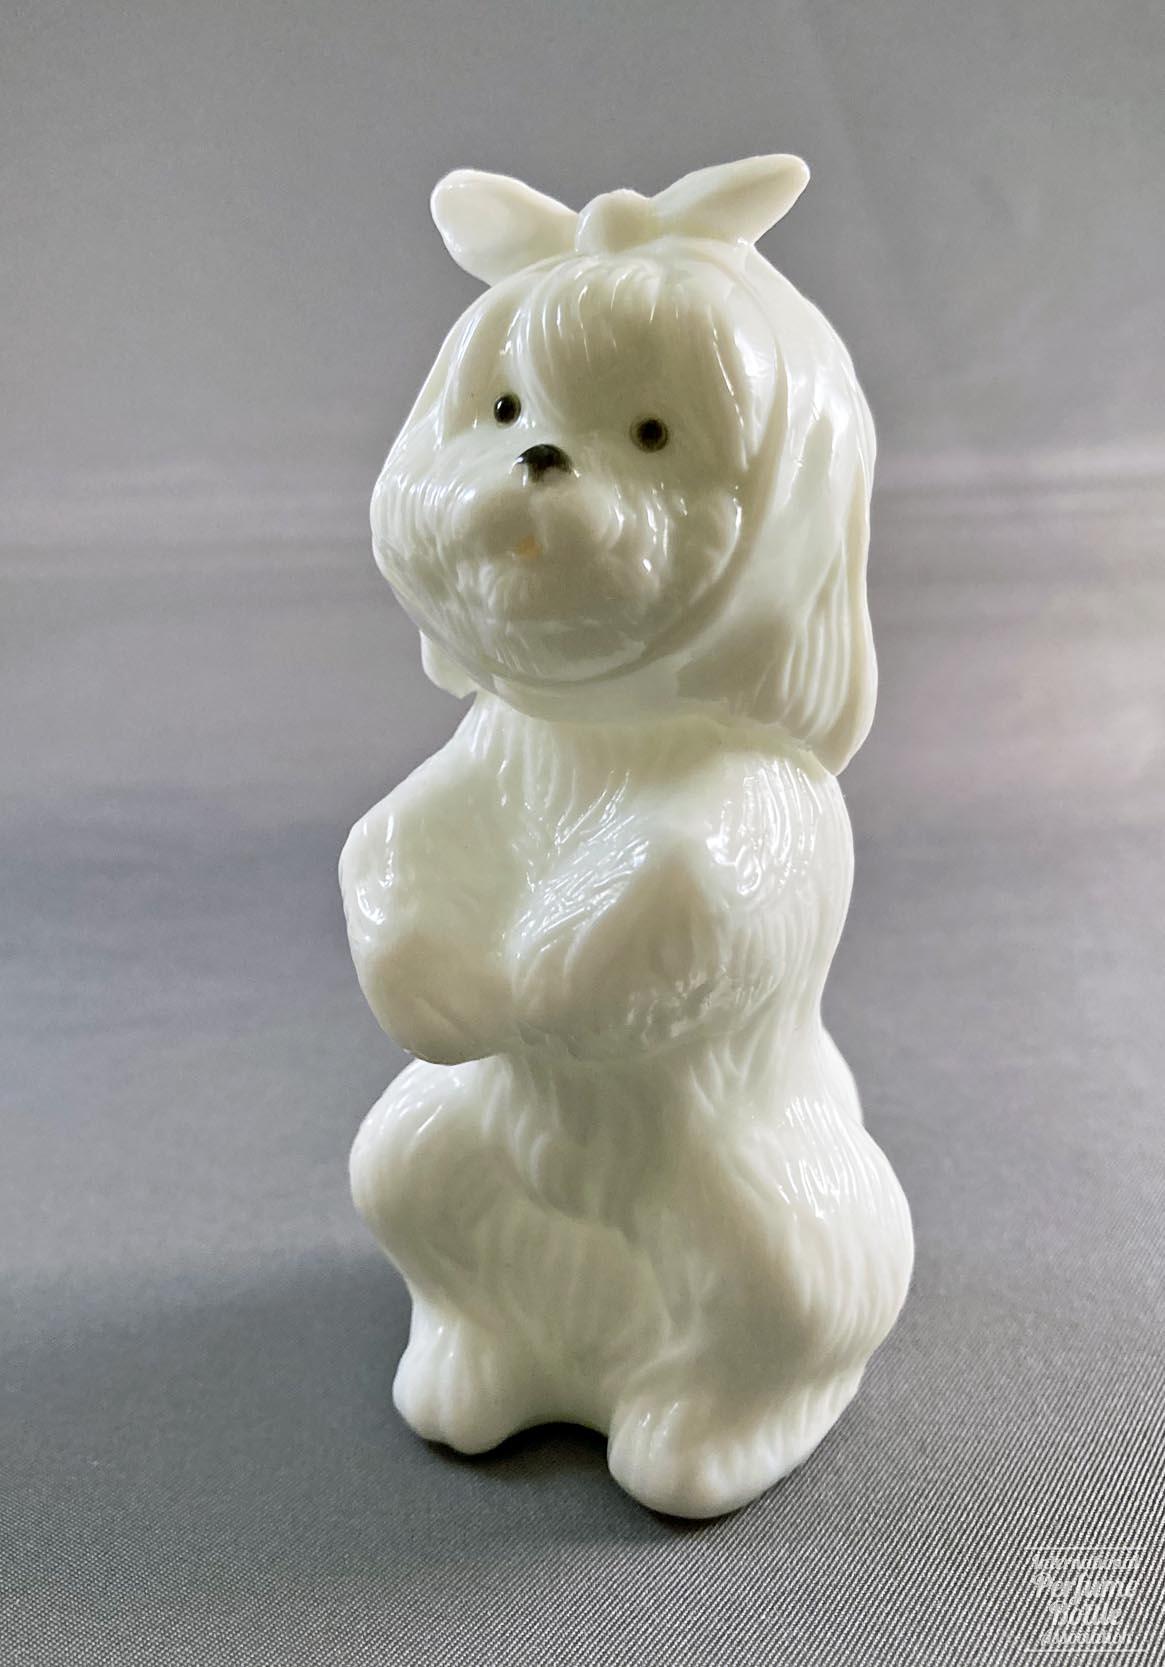 "Sweet Tooth Terrier" Decanter by Avon